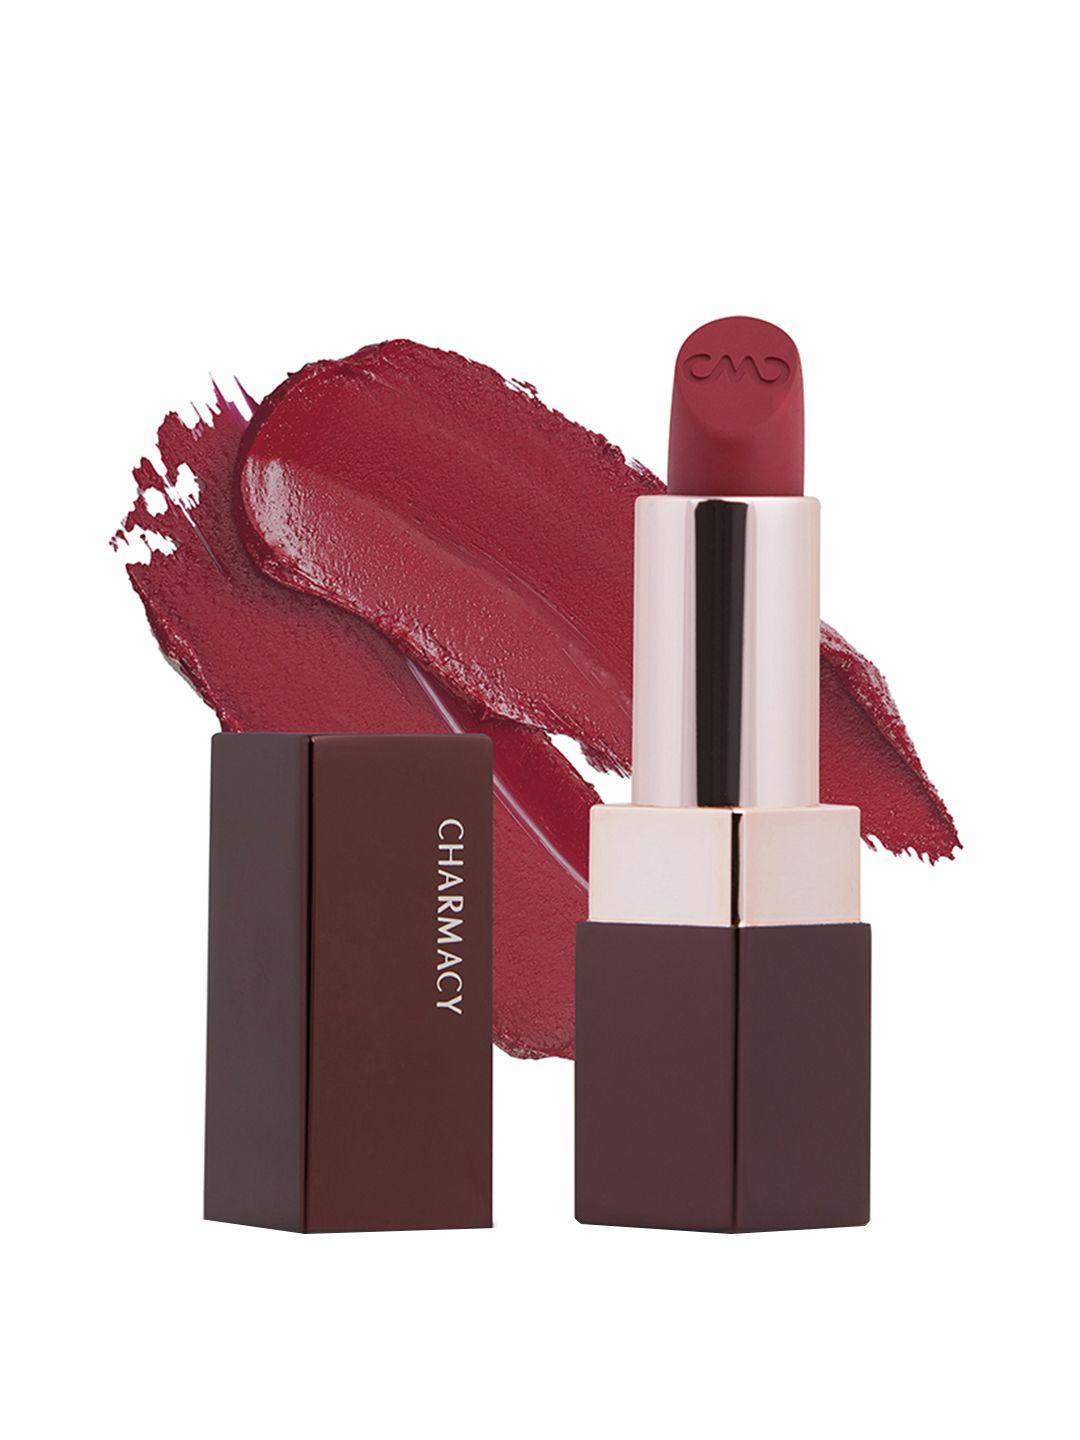 charmacy milano soft satin matte high-coverage hydrating lipstick 3.8g - rusty red 51